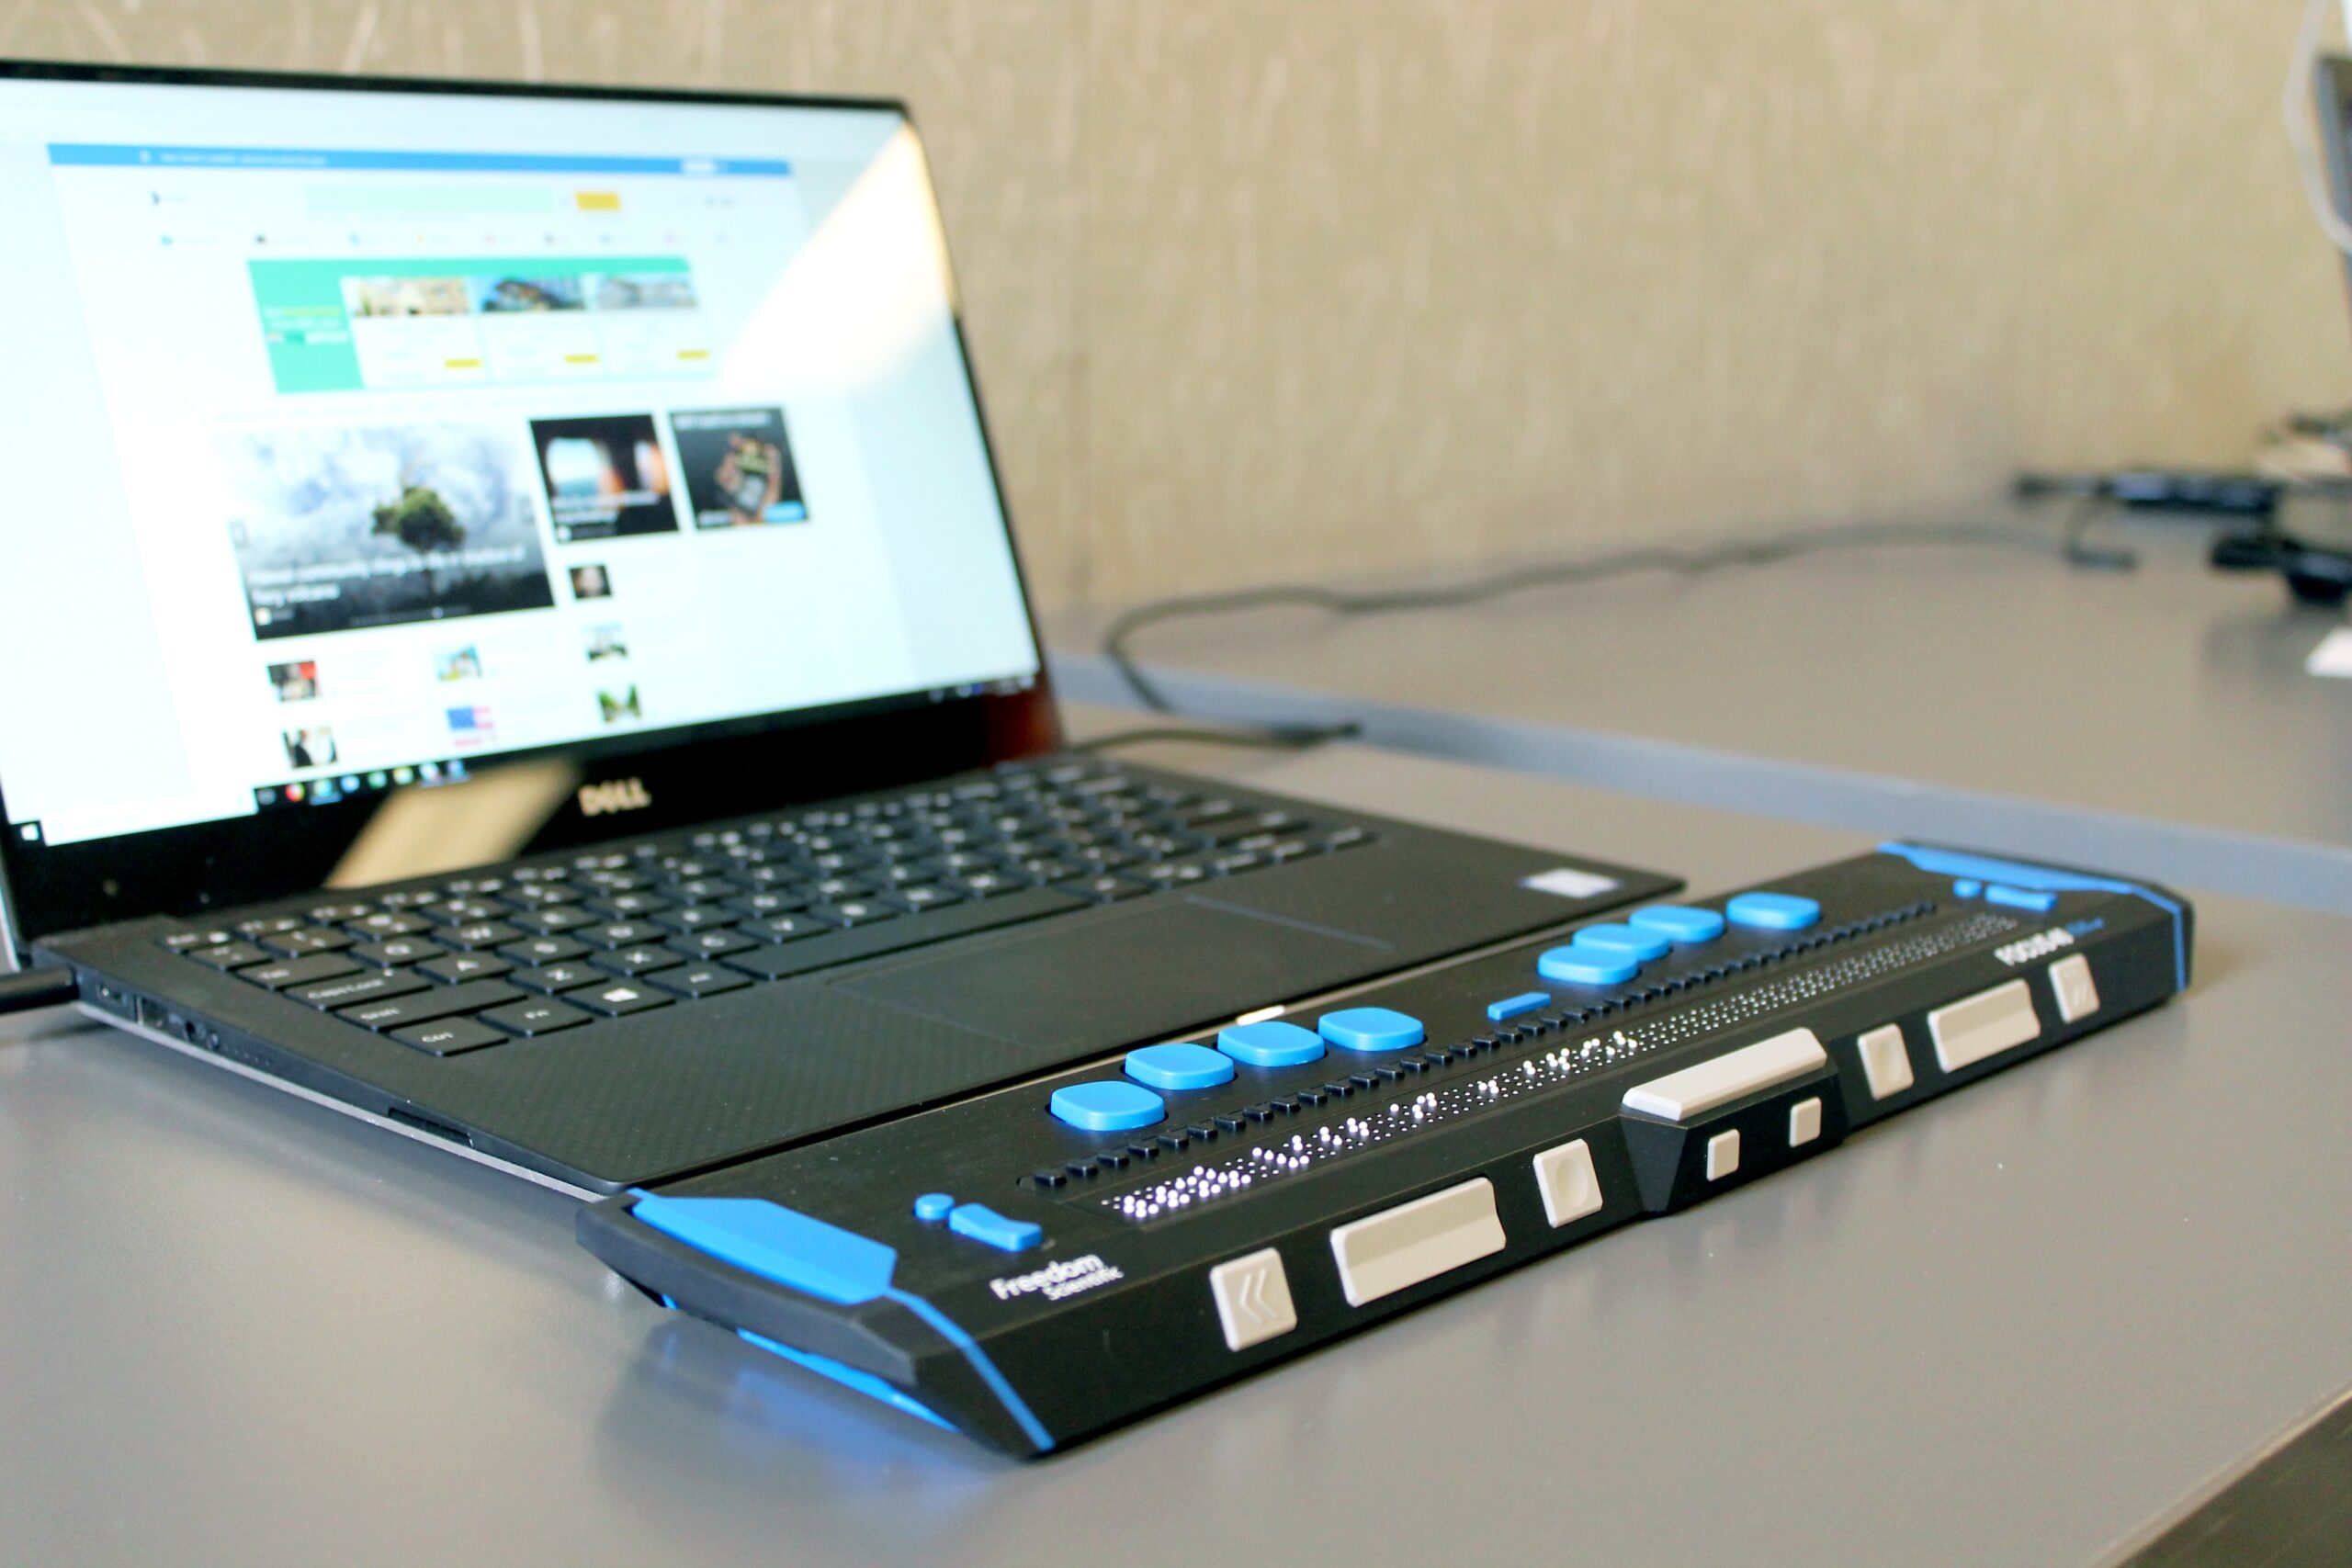 A digital Braille machine which is blue and black in colour is sitting in front of a laptop which is placed on a desk.